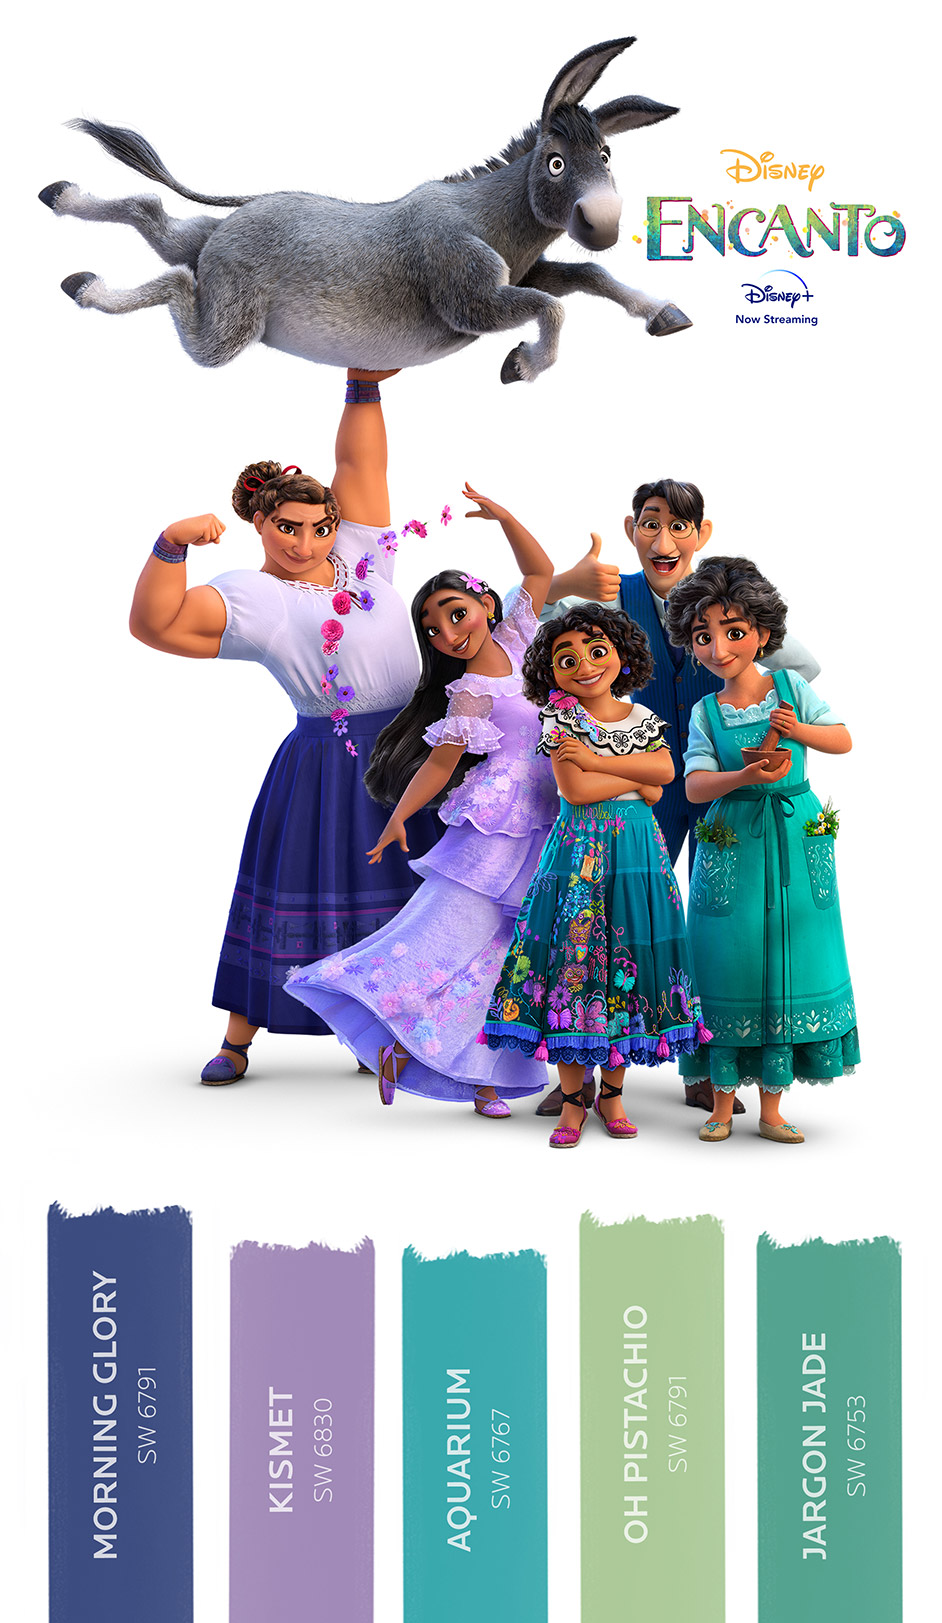 characters from Disney's Encanto and jewel tone colors